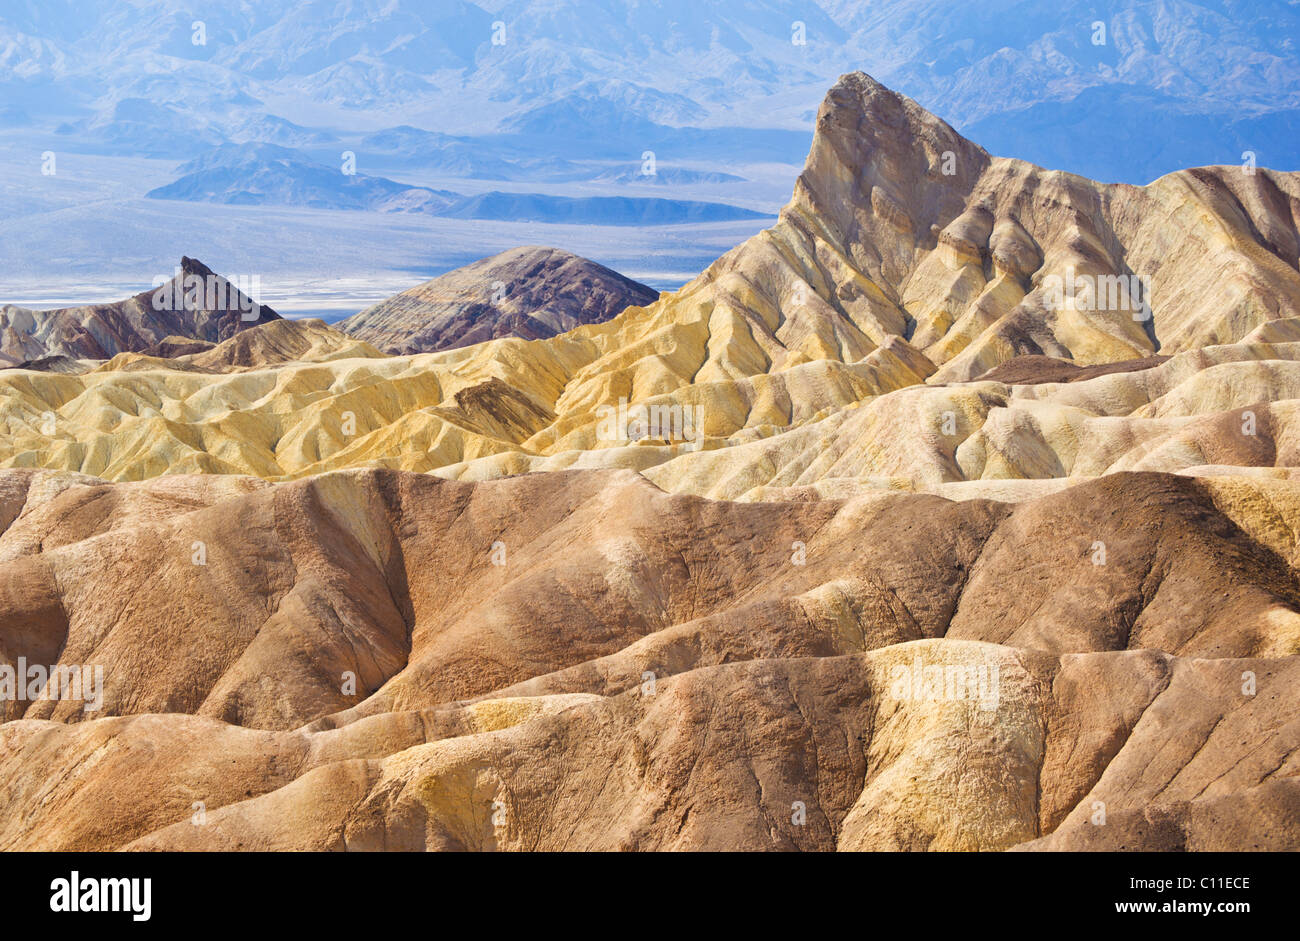 Manly Beacon at Zabriskie Point, Furnace creek, Death Valley National Park, California, USA Stock Photo